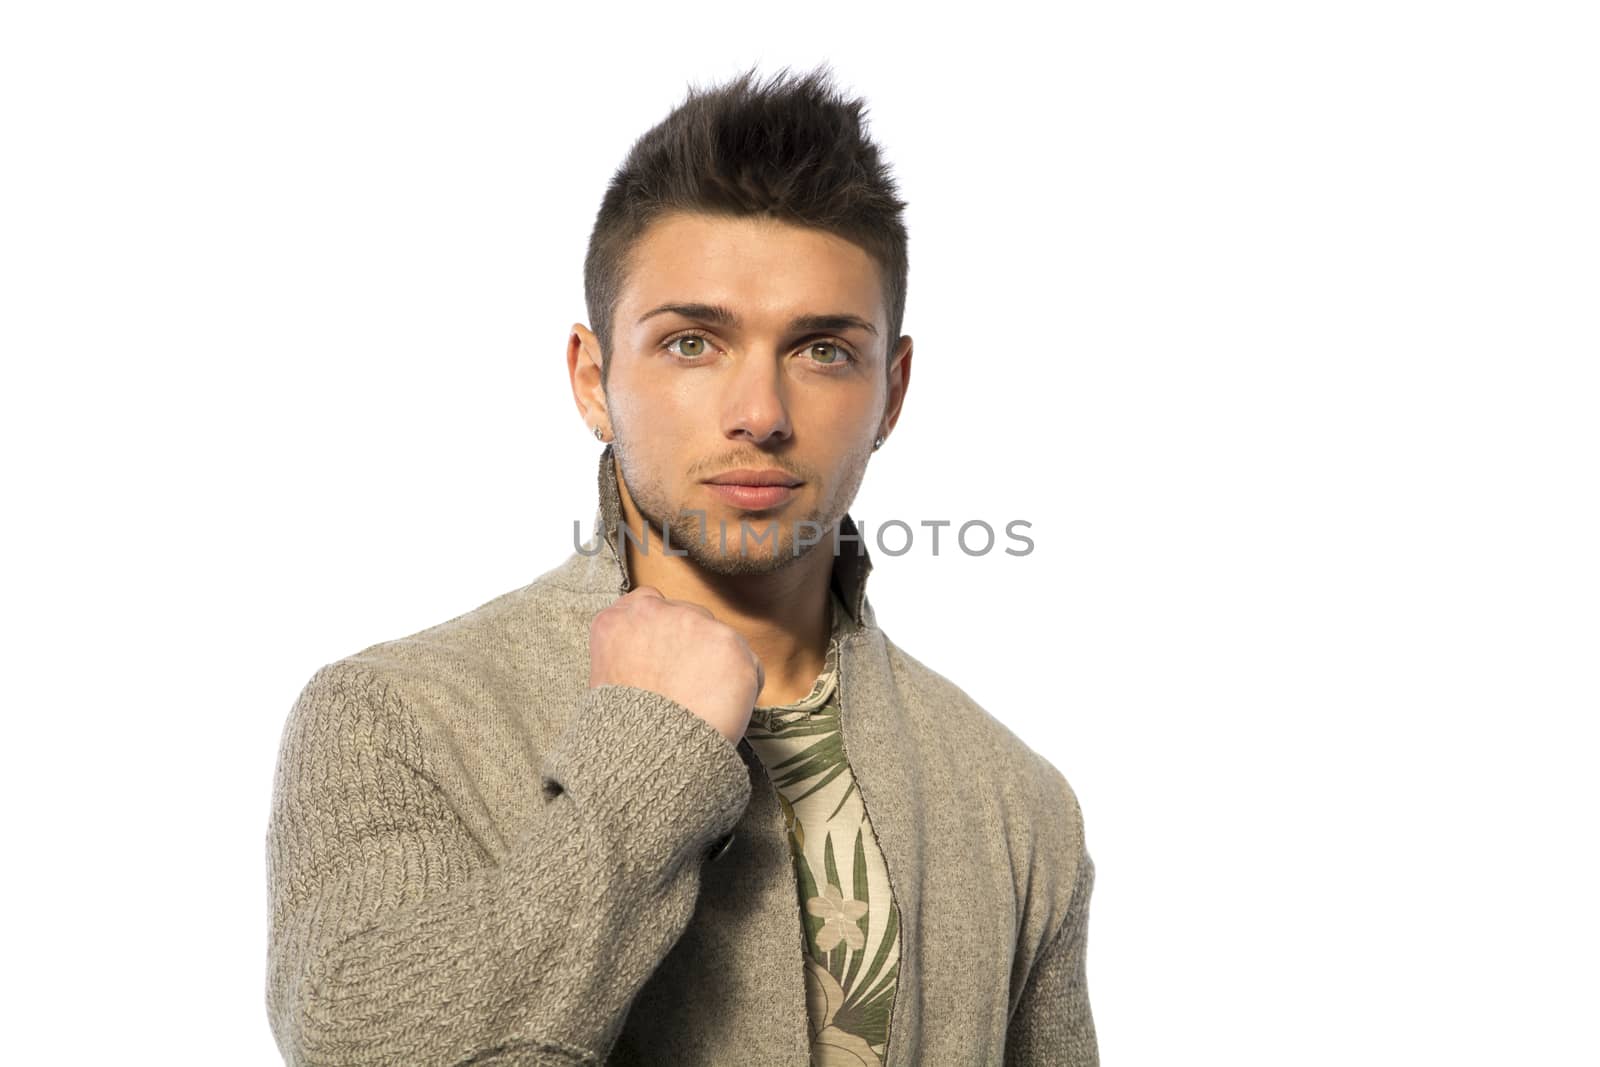 Handsome young man with wool sweater on white background looking at camera